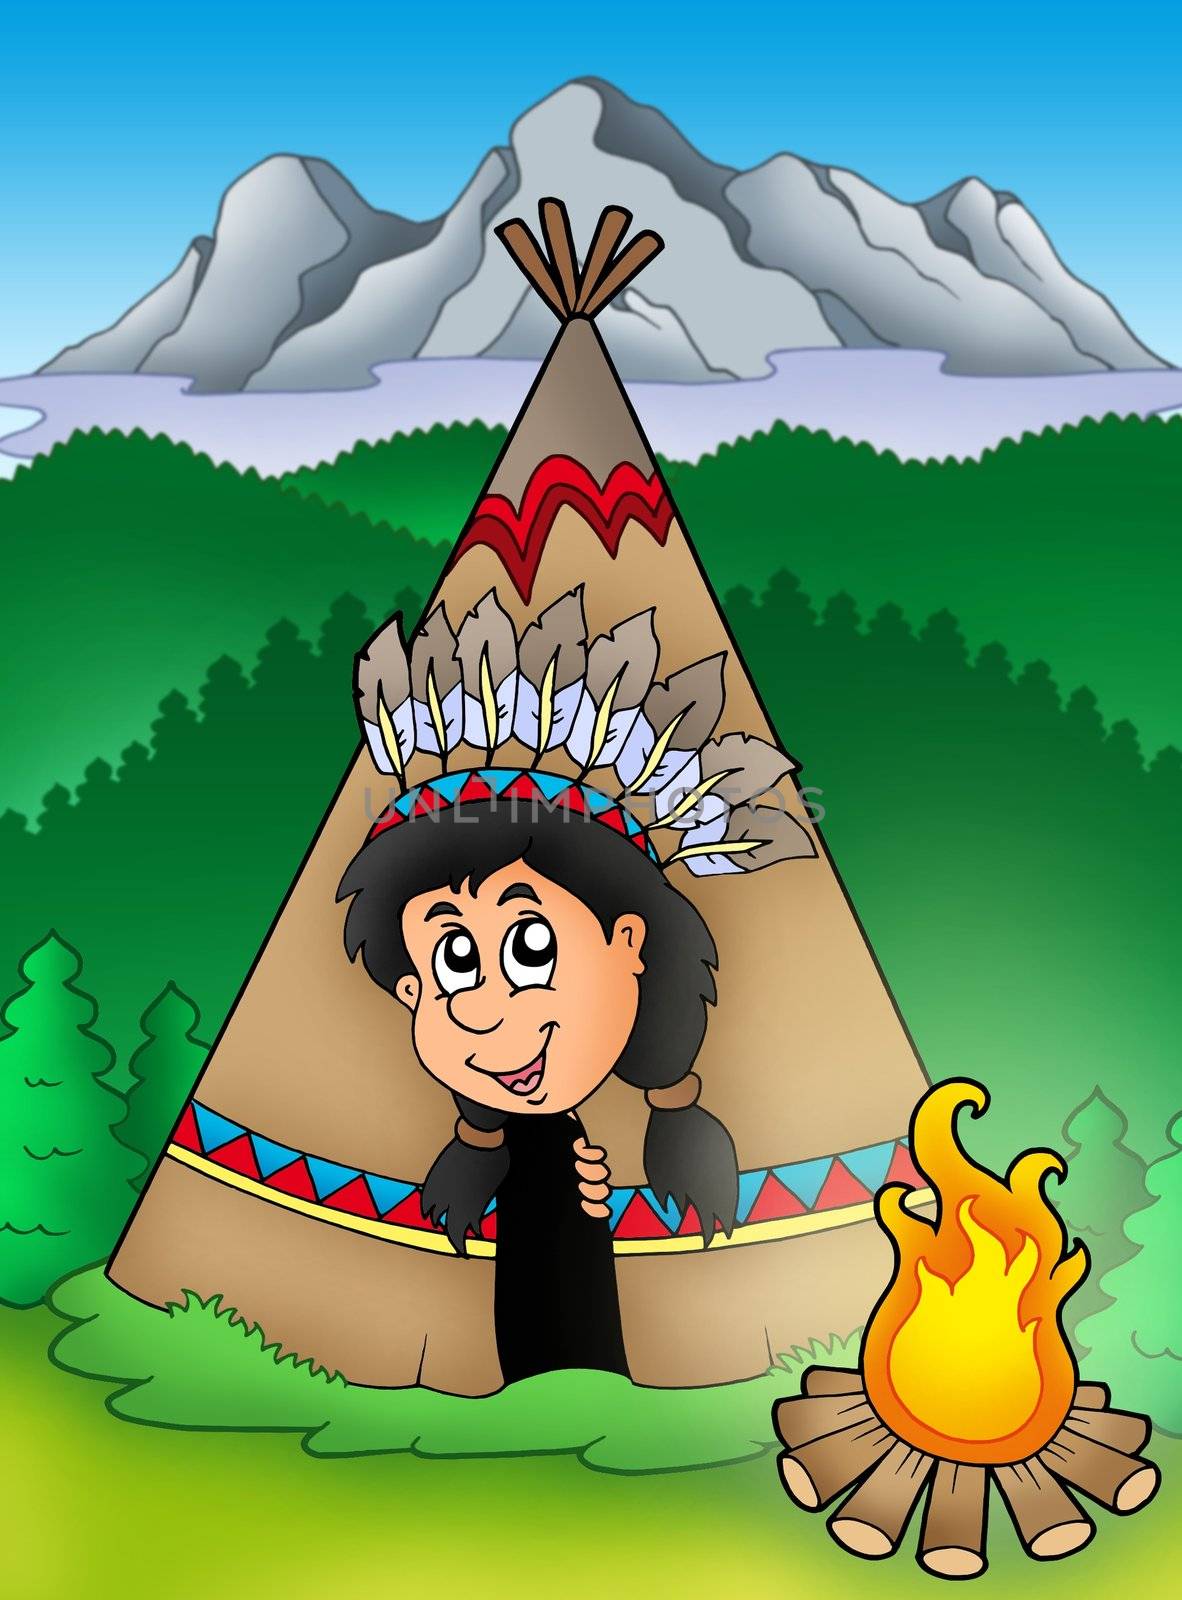 Native American Indian in tepee - color illustration.